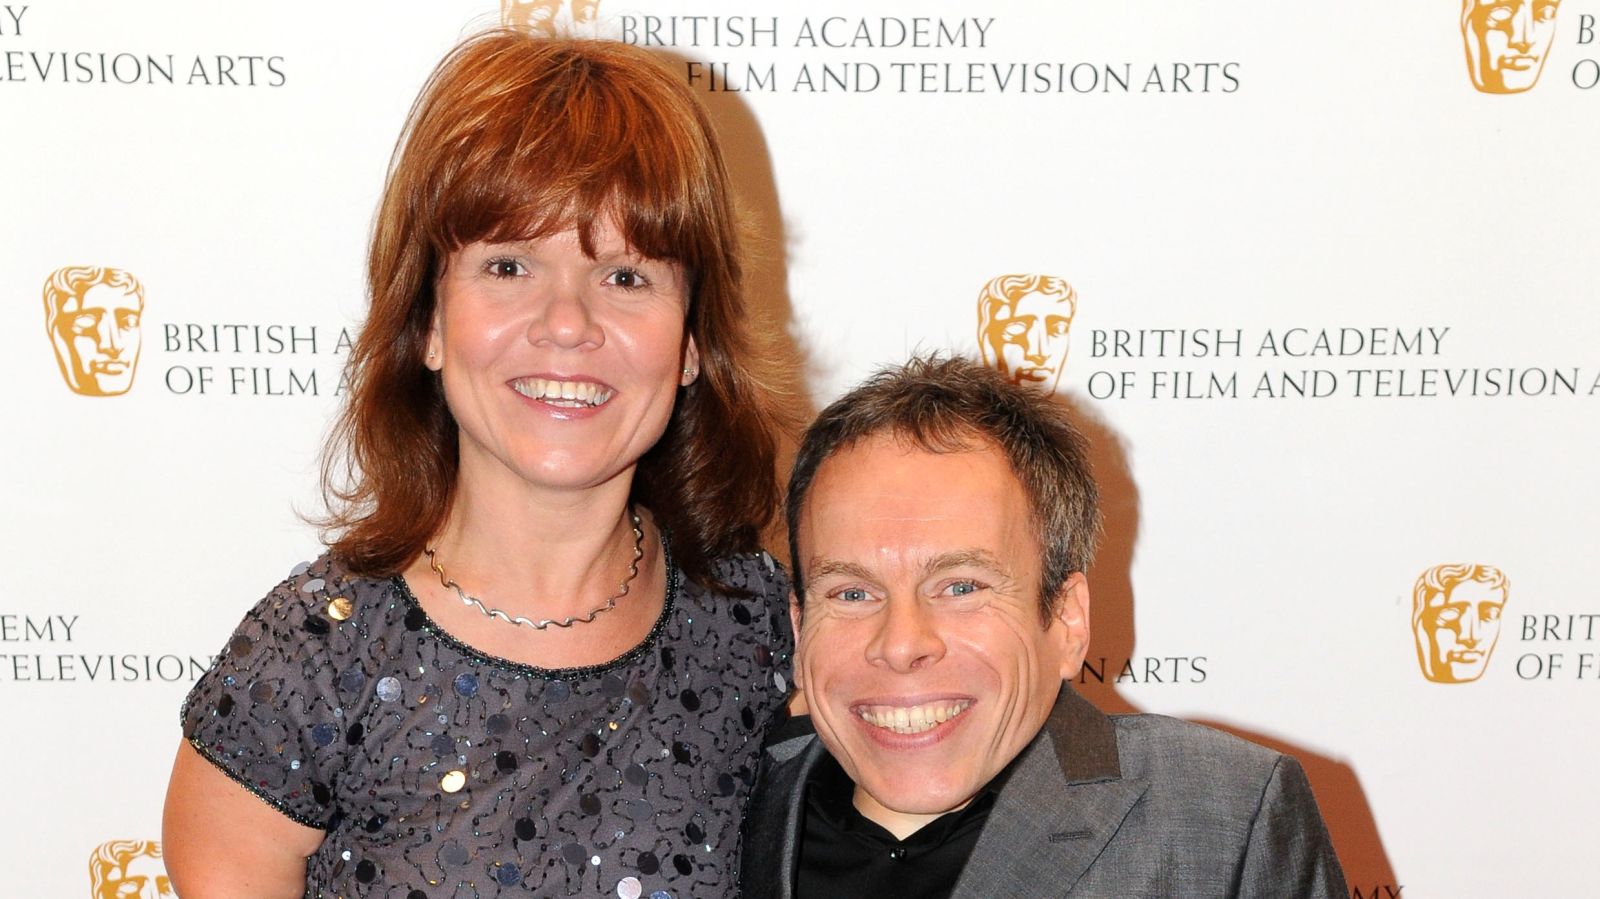 Samantha, the wife of actor Warwick Davis, has died at the age of 53.